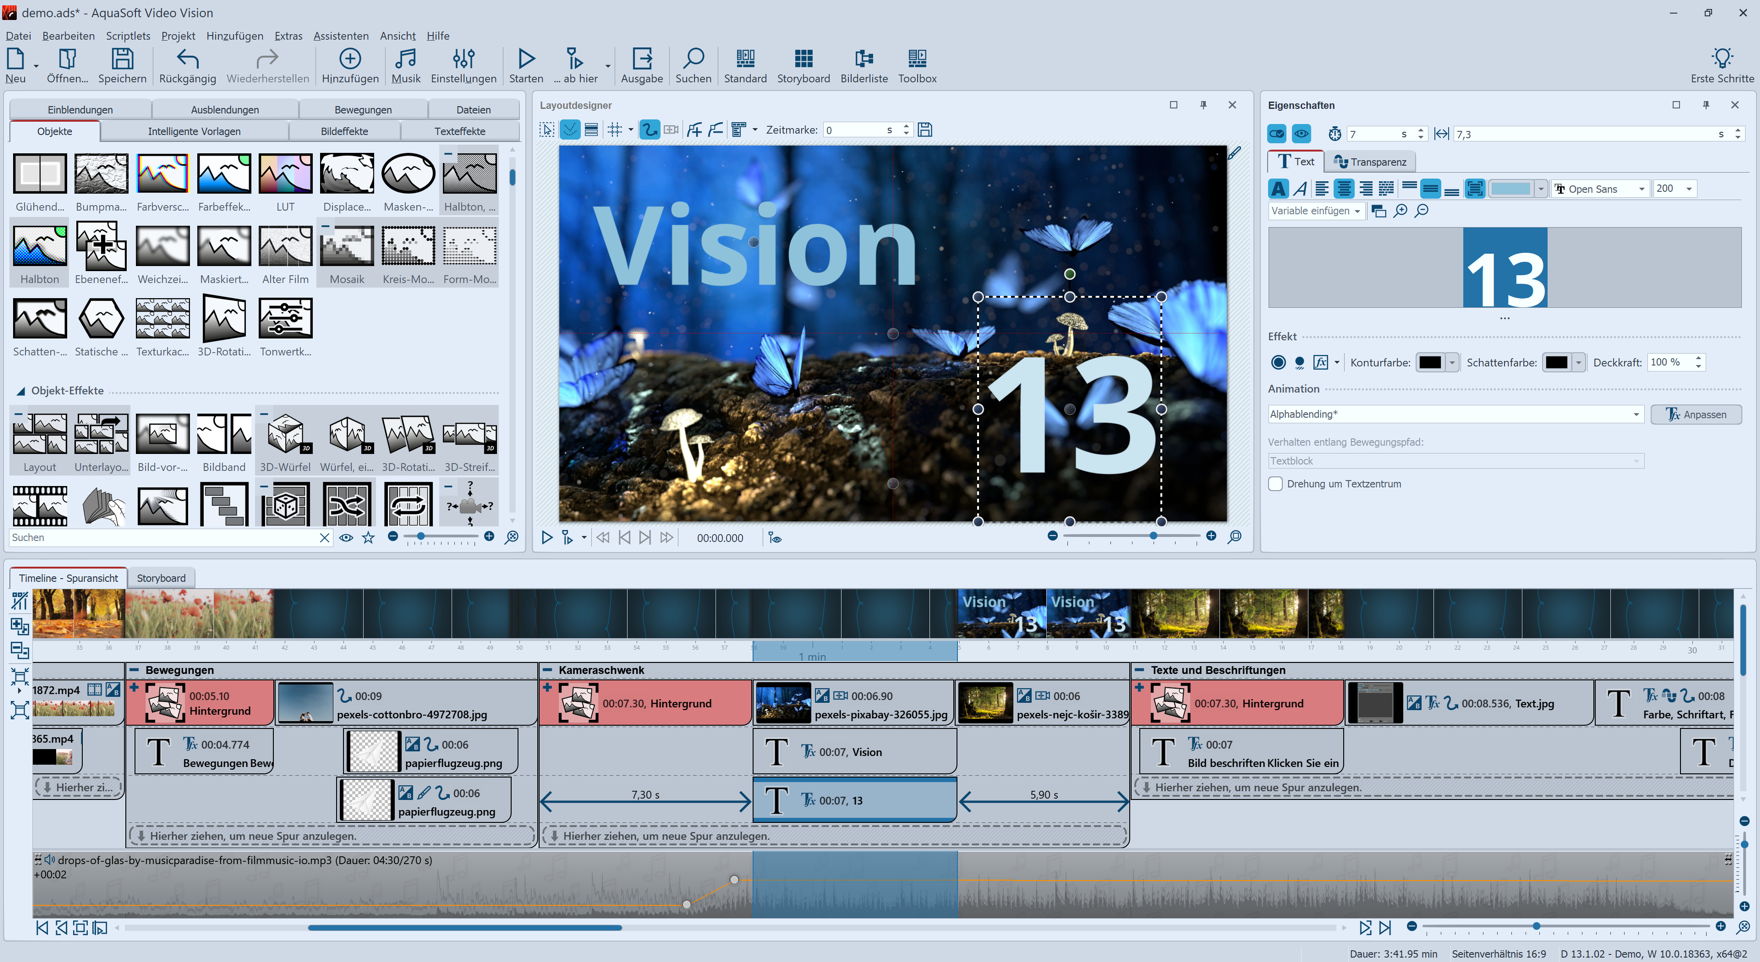 AquaSoft Video Vision 14.2.13 download the last version for android